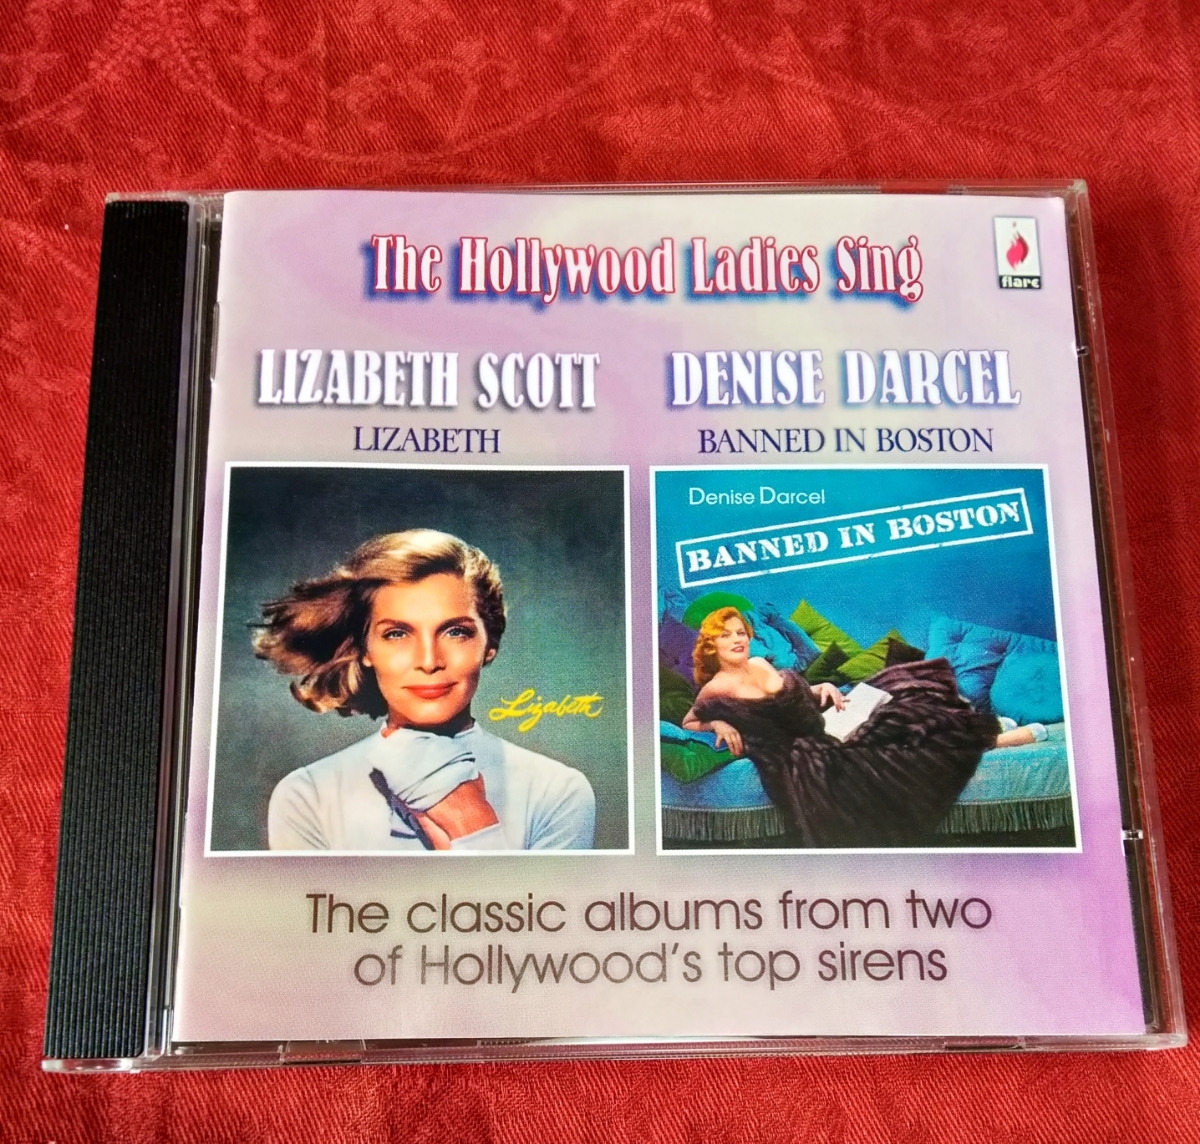 LIZABETH SCOTT DENISE DARCEL The Hollywood Ladies Sing ~The albums Hollywood's from classic of two top セール商品 種類豊富な品揃え sirens